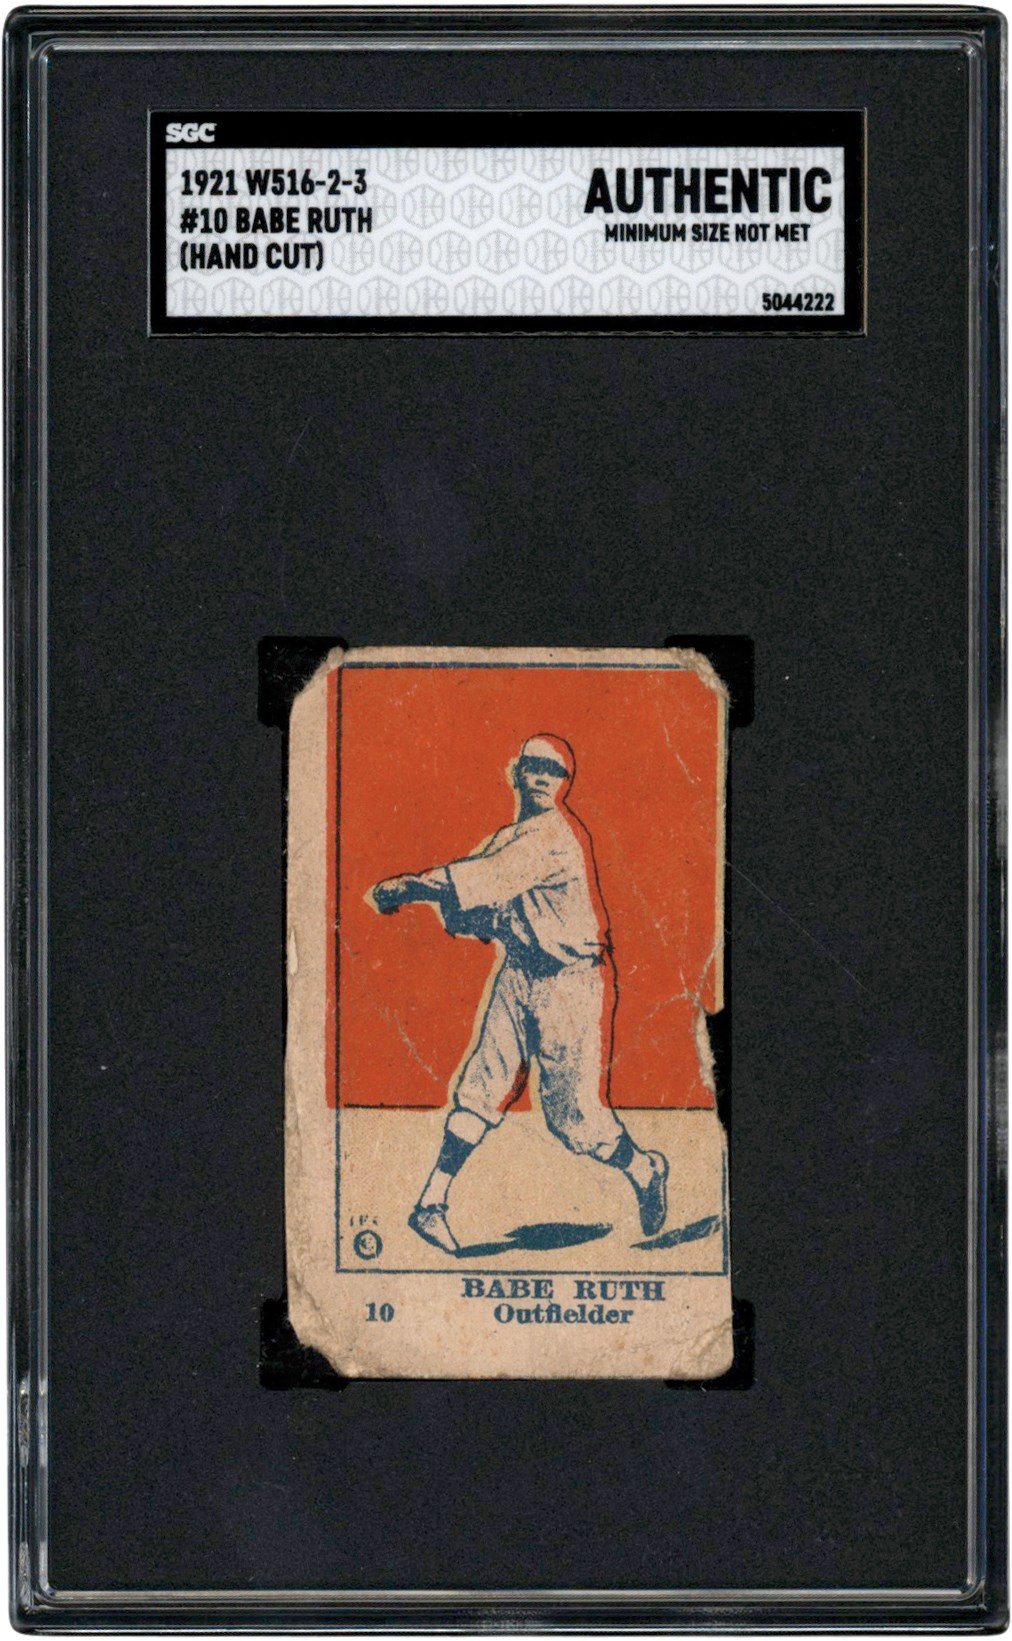 - are 1921 W516-2-3 #10 Babe Ruth SGC Authentic